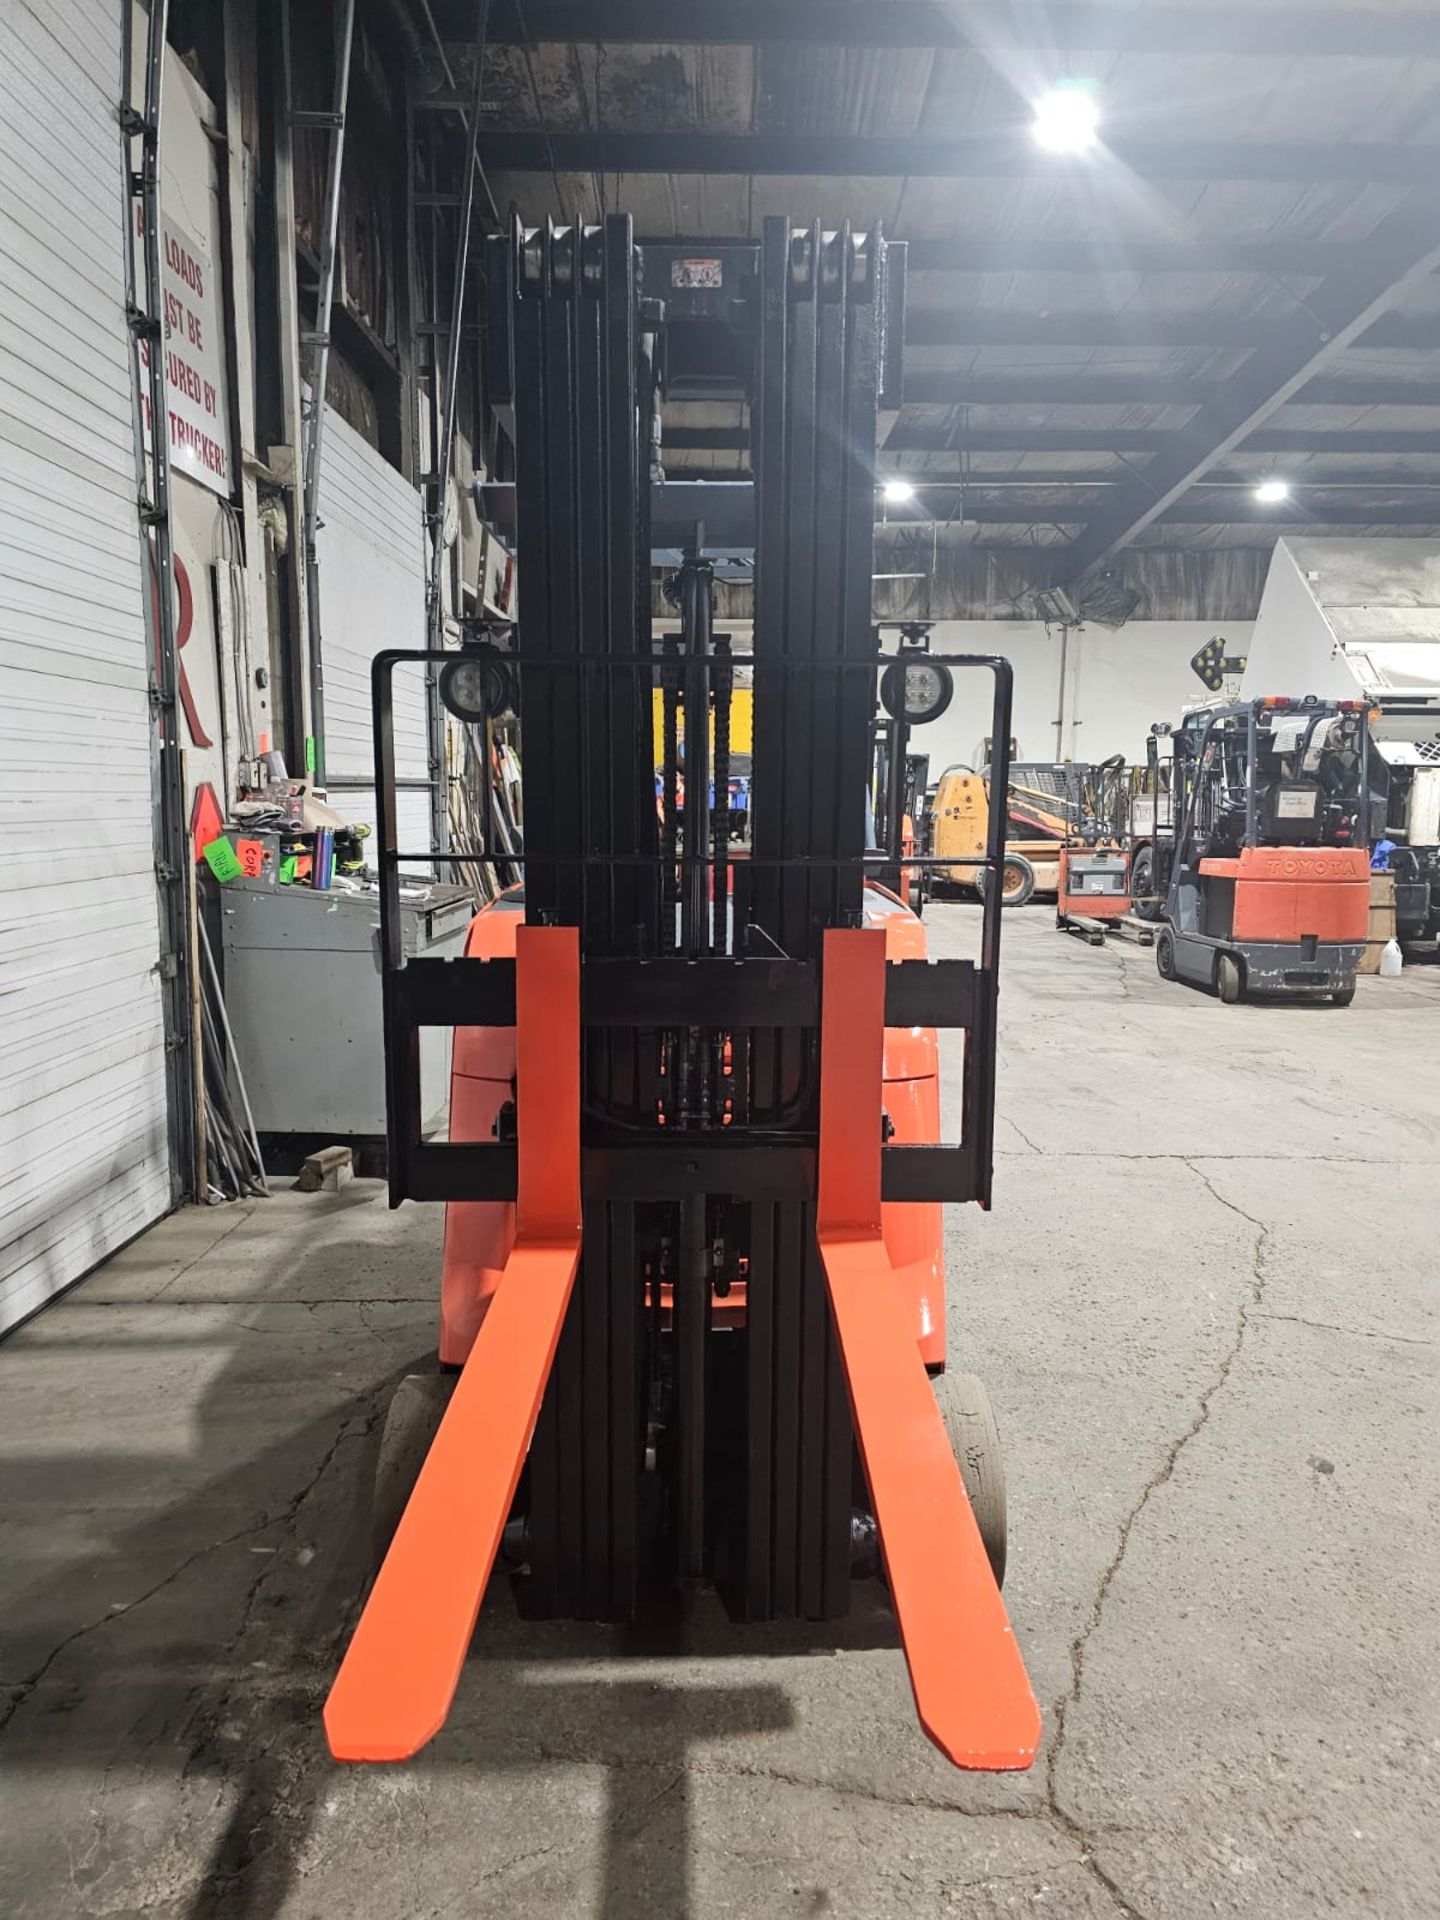 2017 Toyota 4,000lbs Capacity Electric Forklift with 4-STAGE Mast, 276" load height sideshift - Image 6 of 7